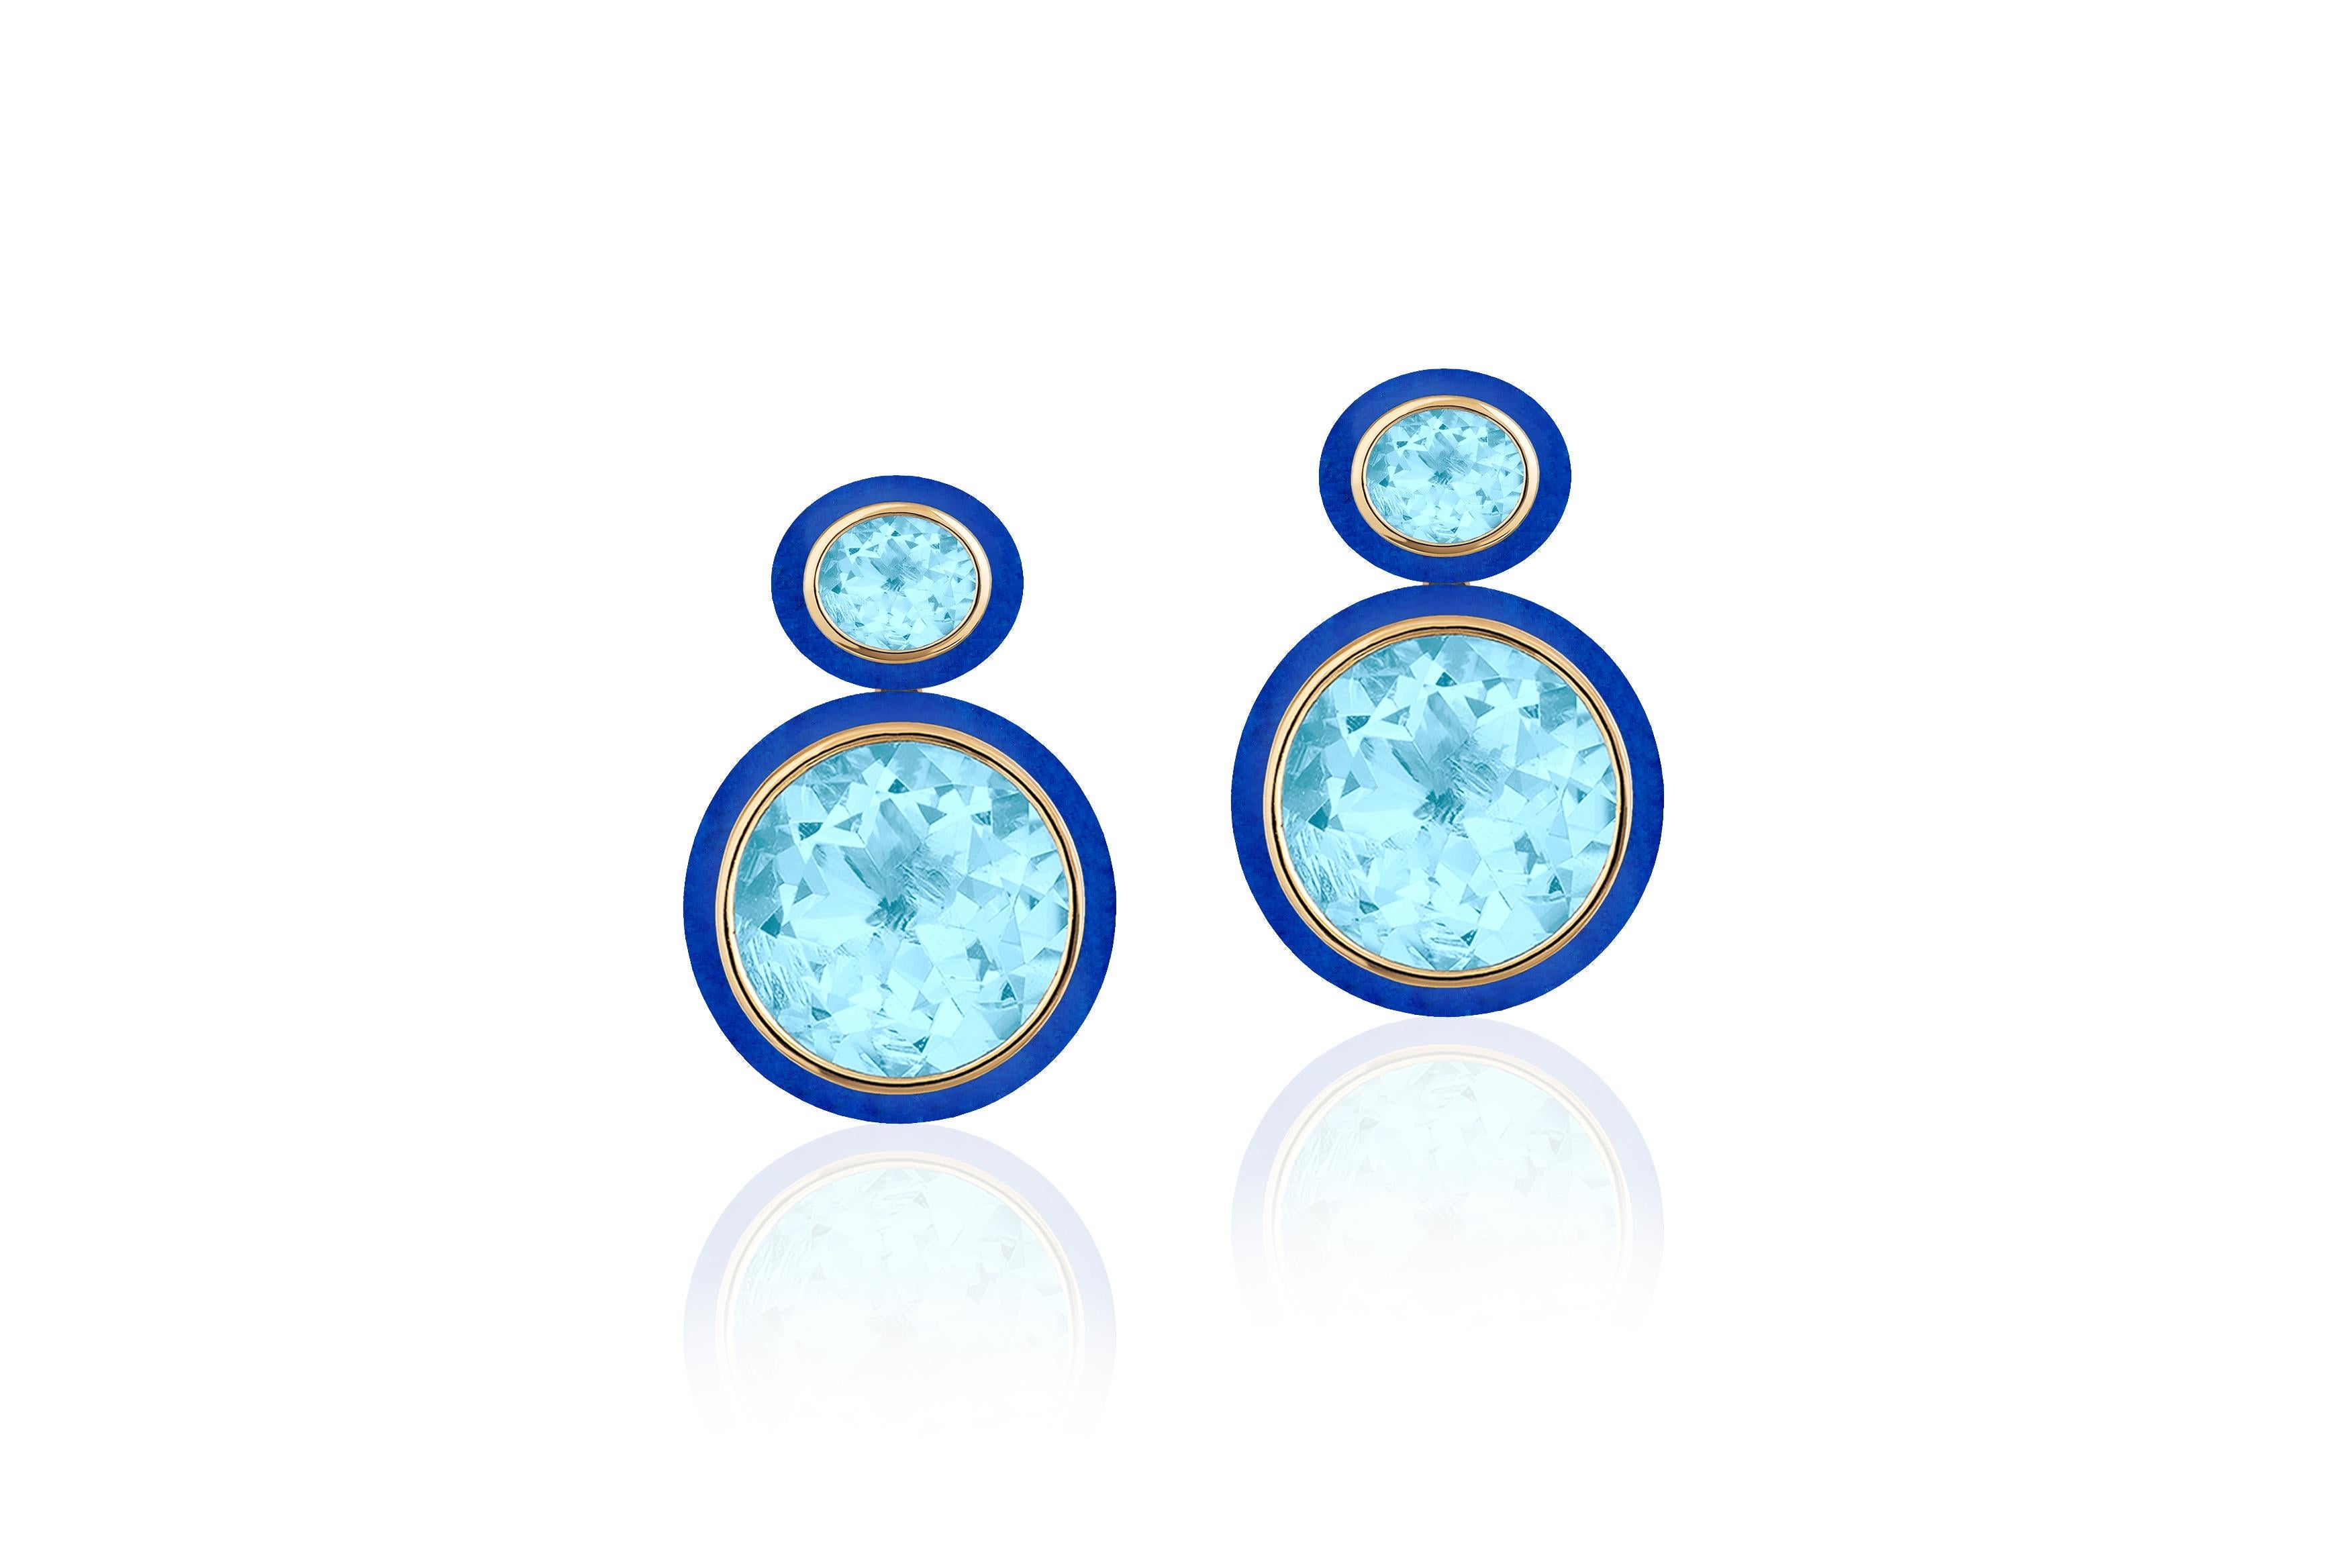 These Oval Shape Blue Topaz and Lapis Lazuli Earrings in 18K Yellow Gold from the 'Melange' Collection are a stunning piece of jewelry. The earrings feature two oval-shaped Blue Topaz gemstones with a Lapis Lazuli Border- set in a rich 18K yellow